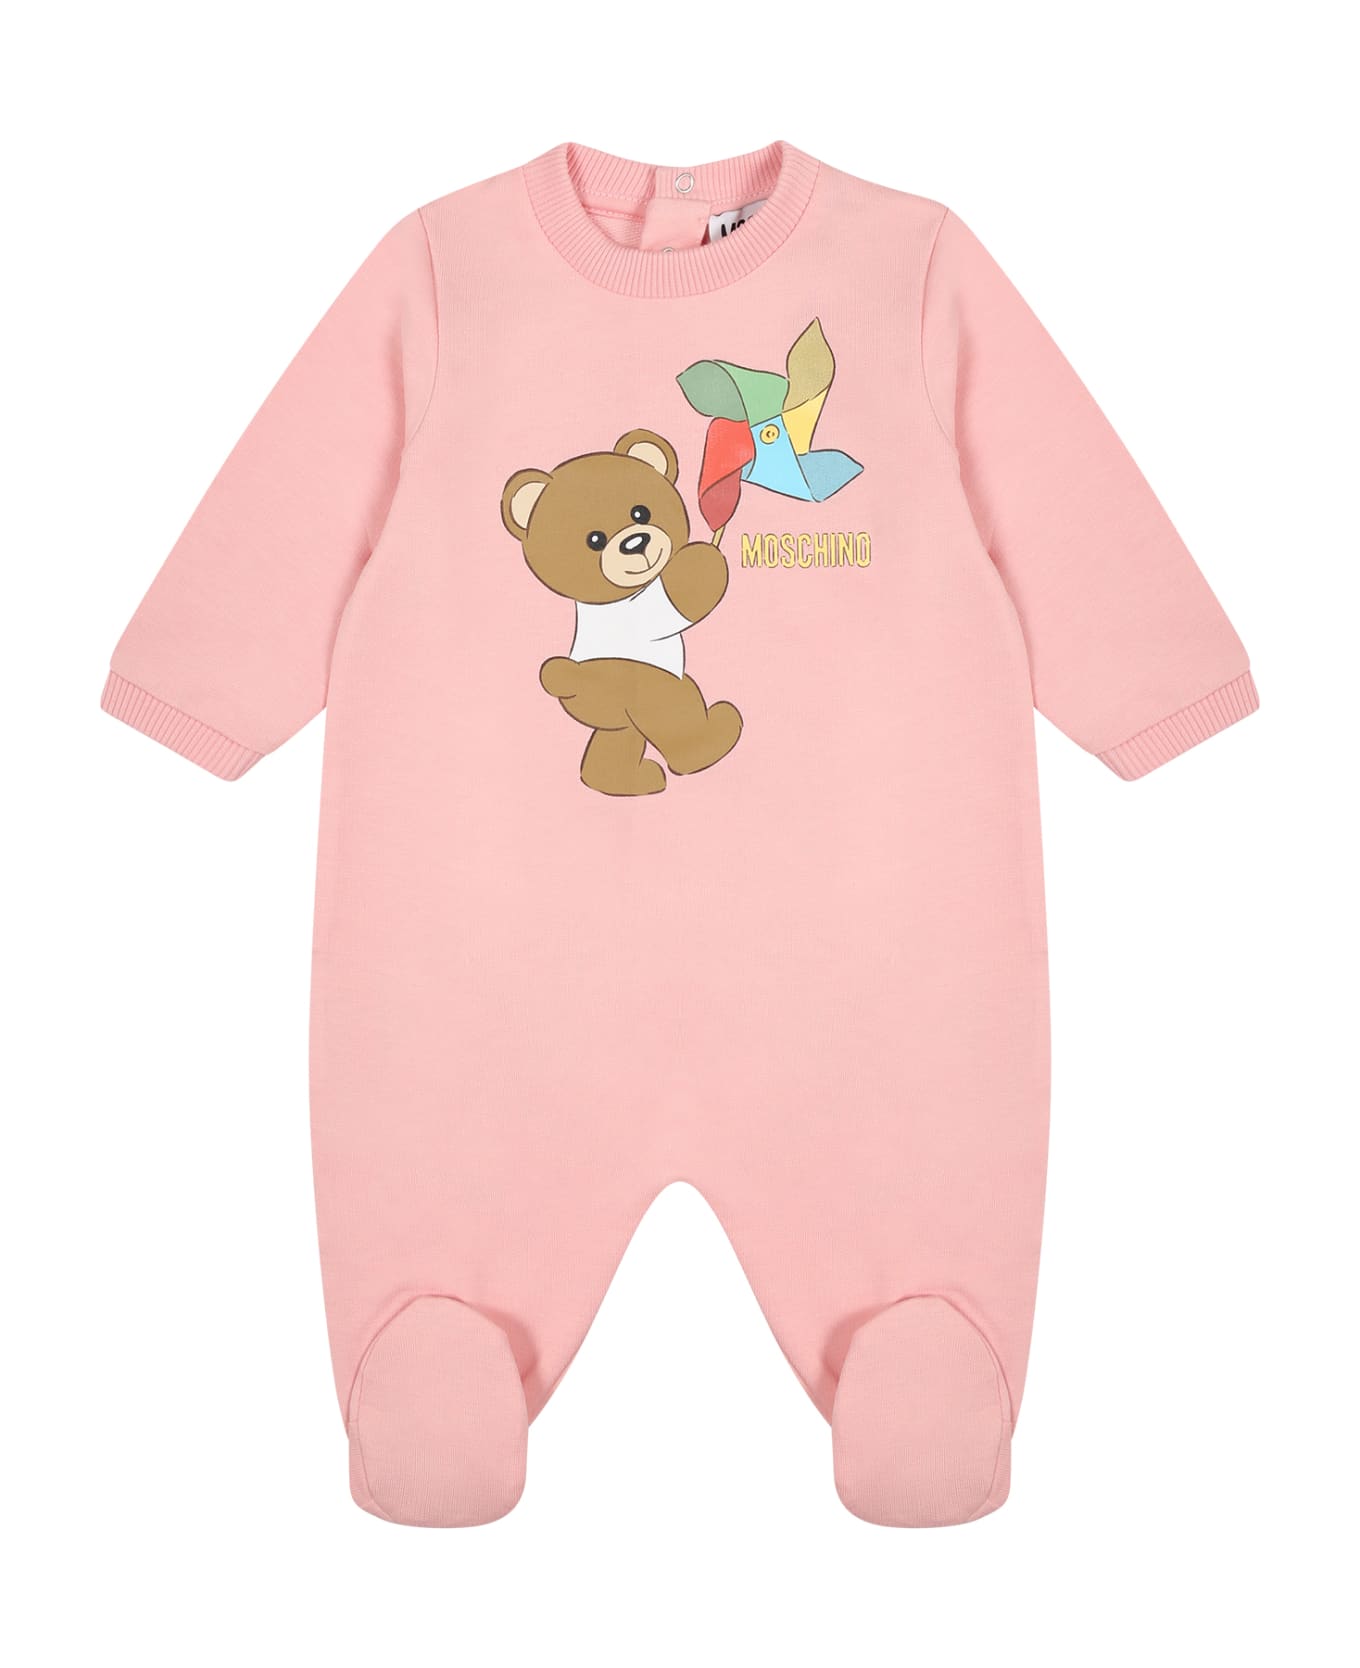 Moschino Pink Bodysuit For Baby Girl With Teddy Bear And Multicolor Pinwheel - Pink